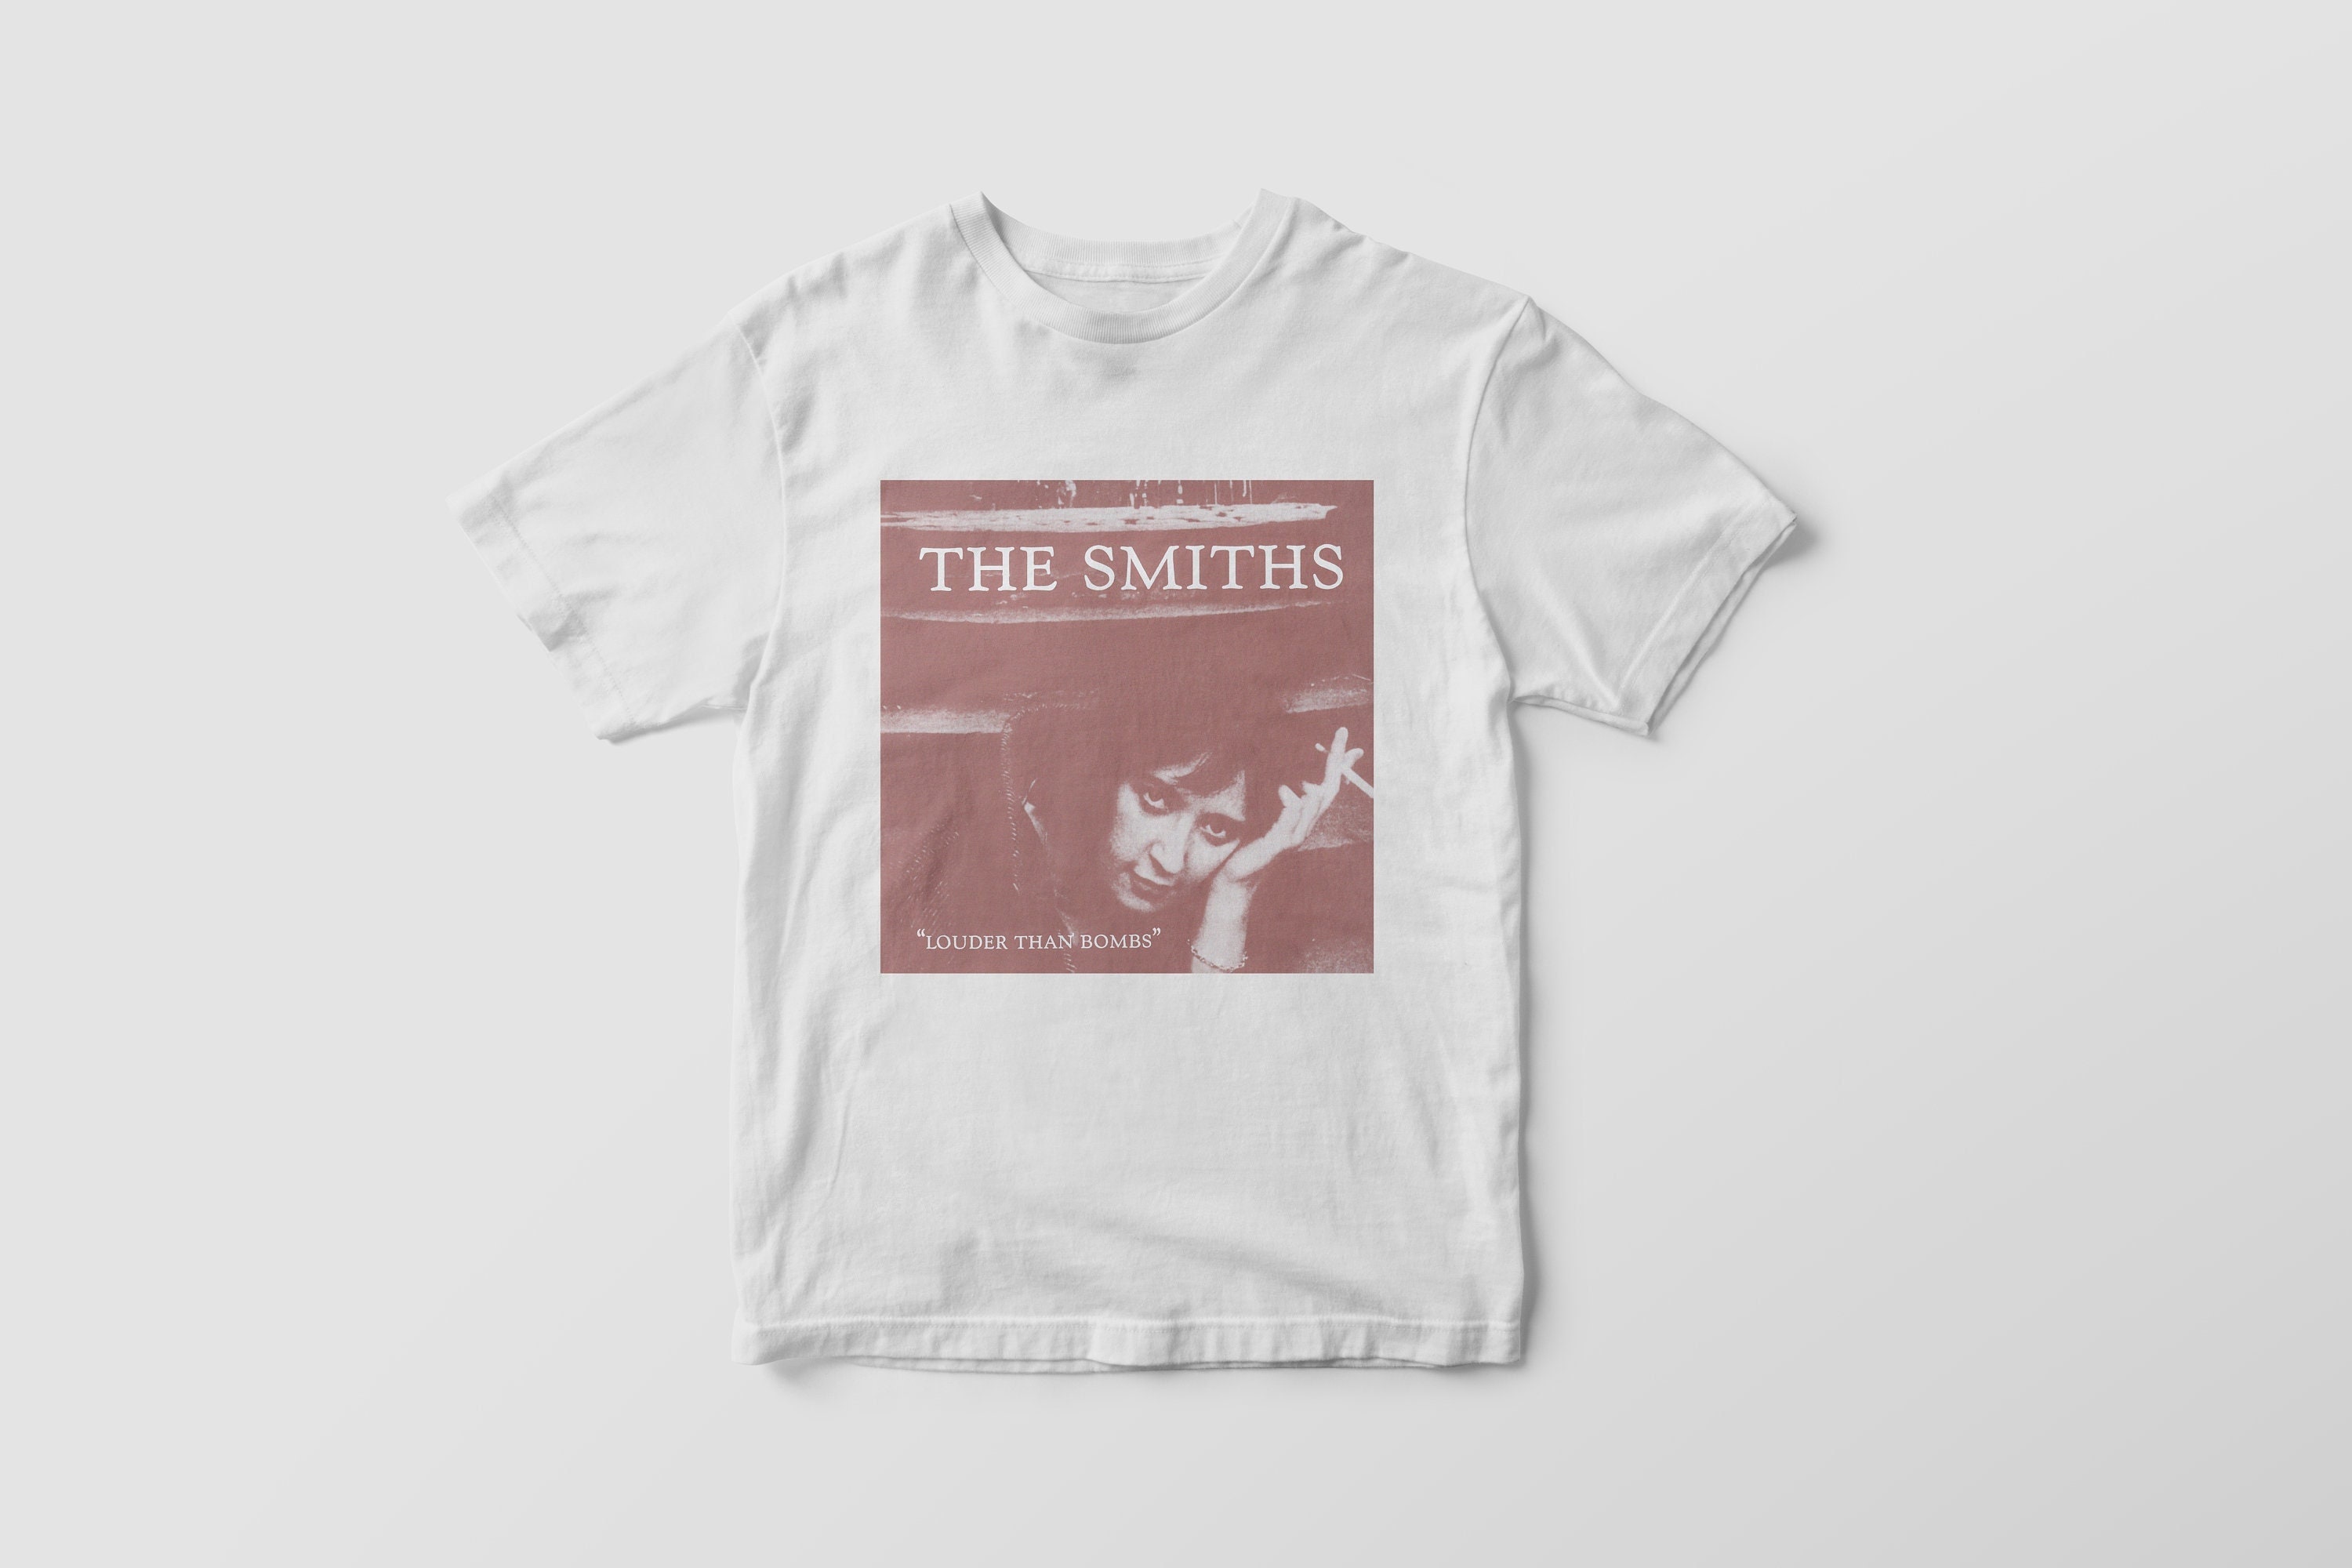 Discover The Smiths Shirt, Louder Than Bombs, Vintage Tee